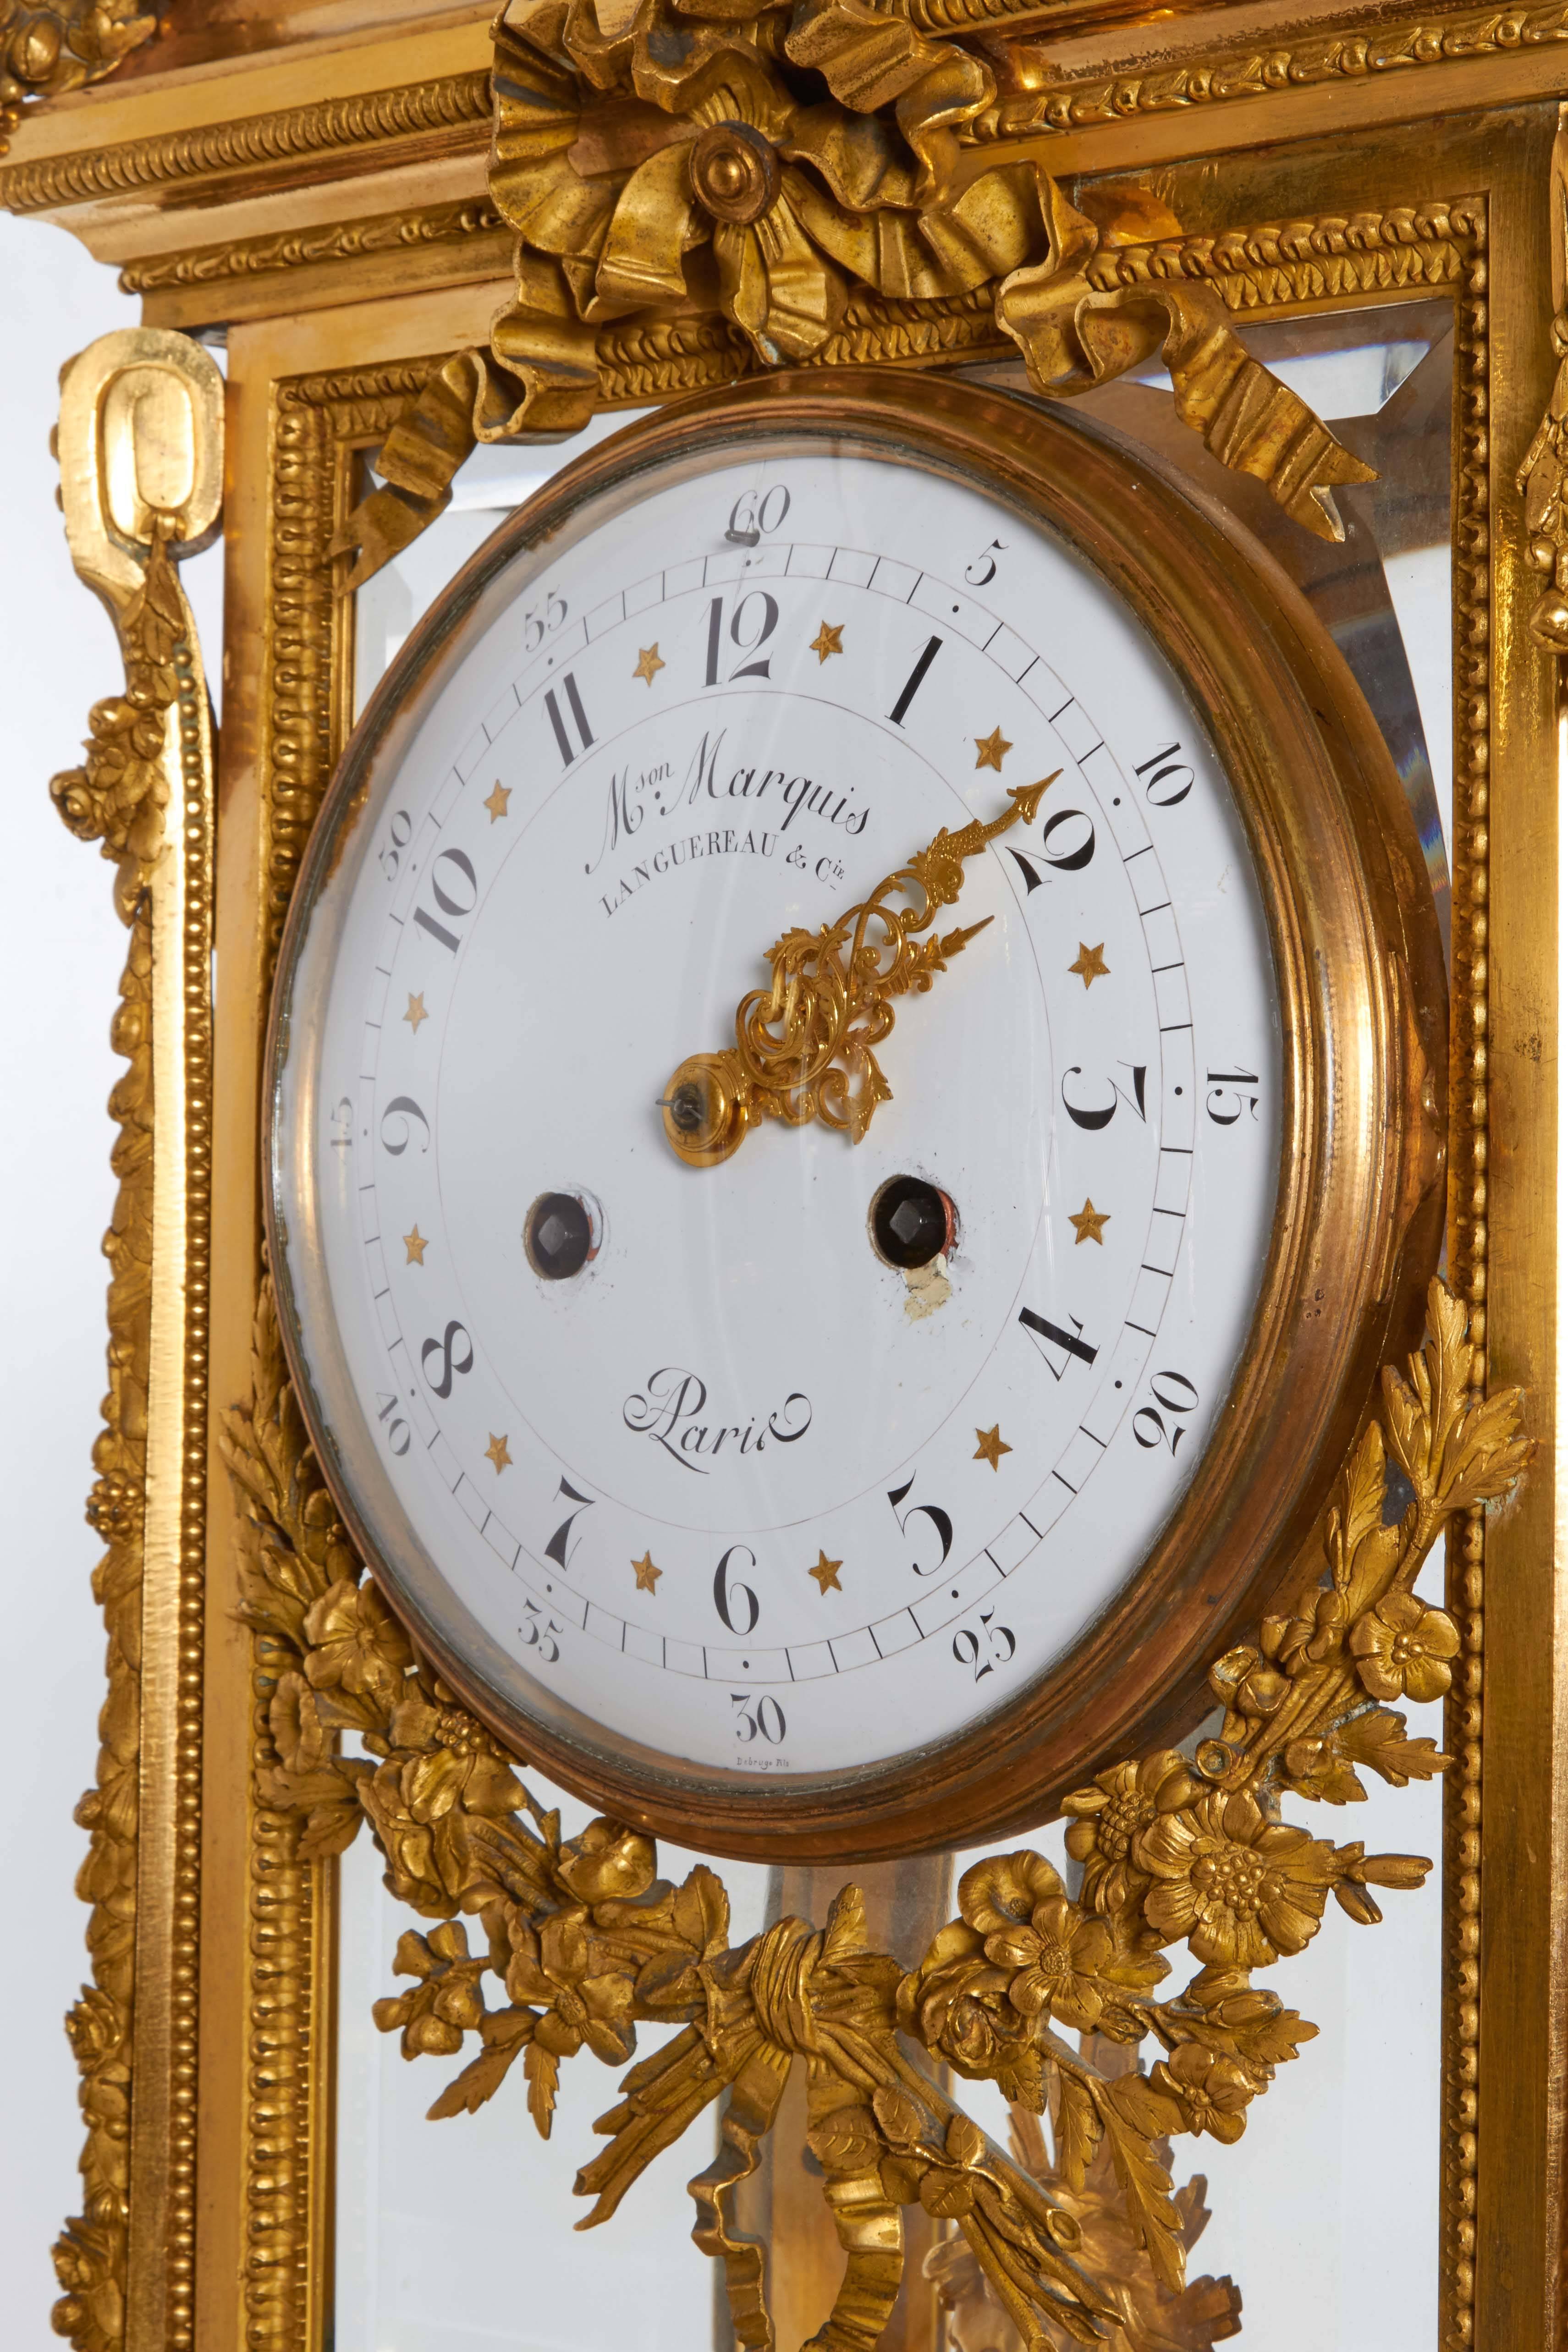 Napoleon III Monumental Antique French Louis XVI Style Ormolu Mantel Clock by Maison Marquis For Sale